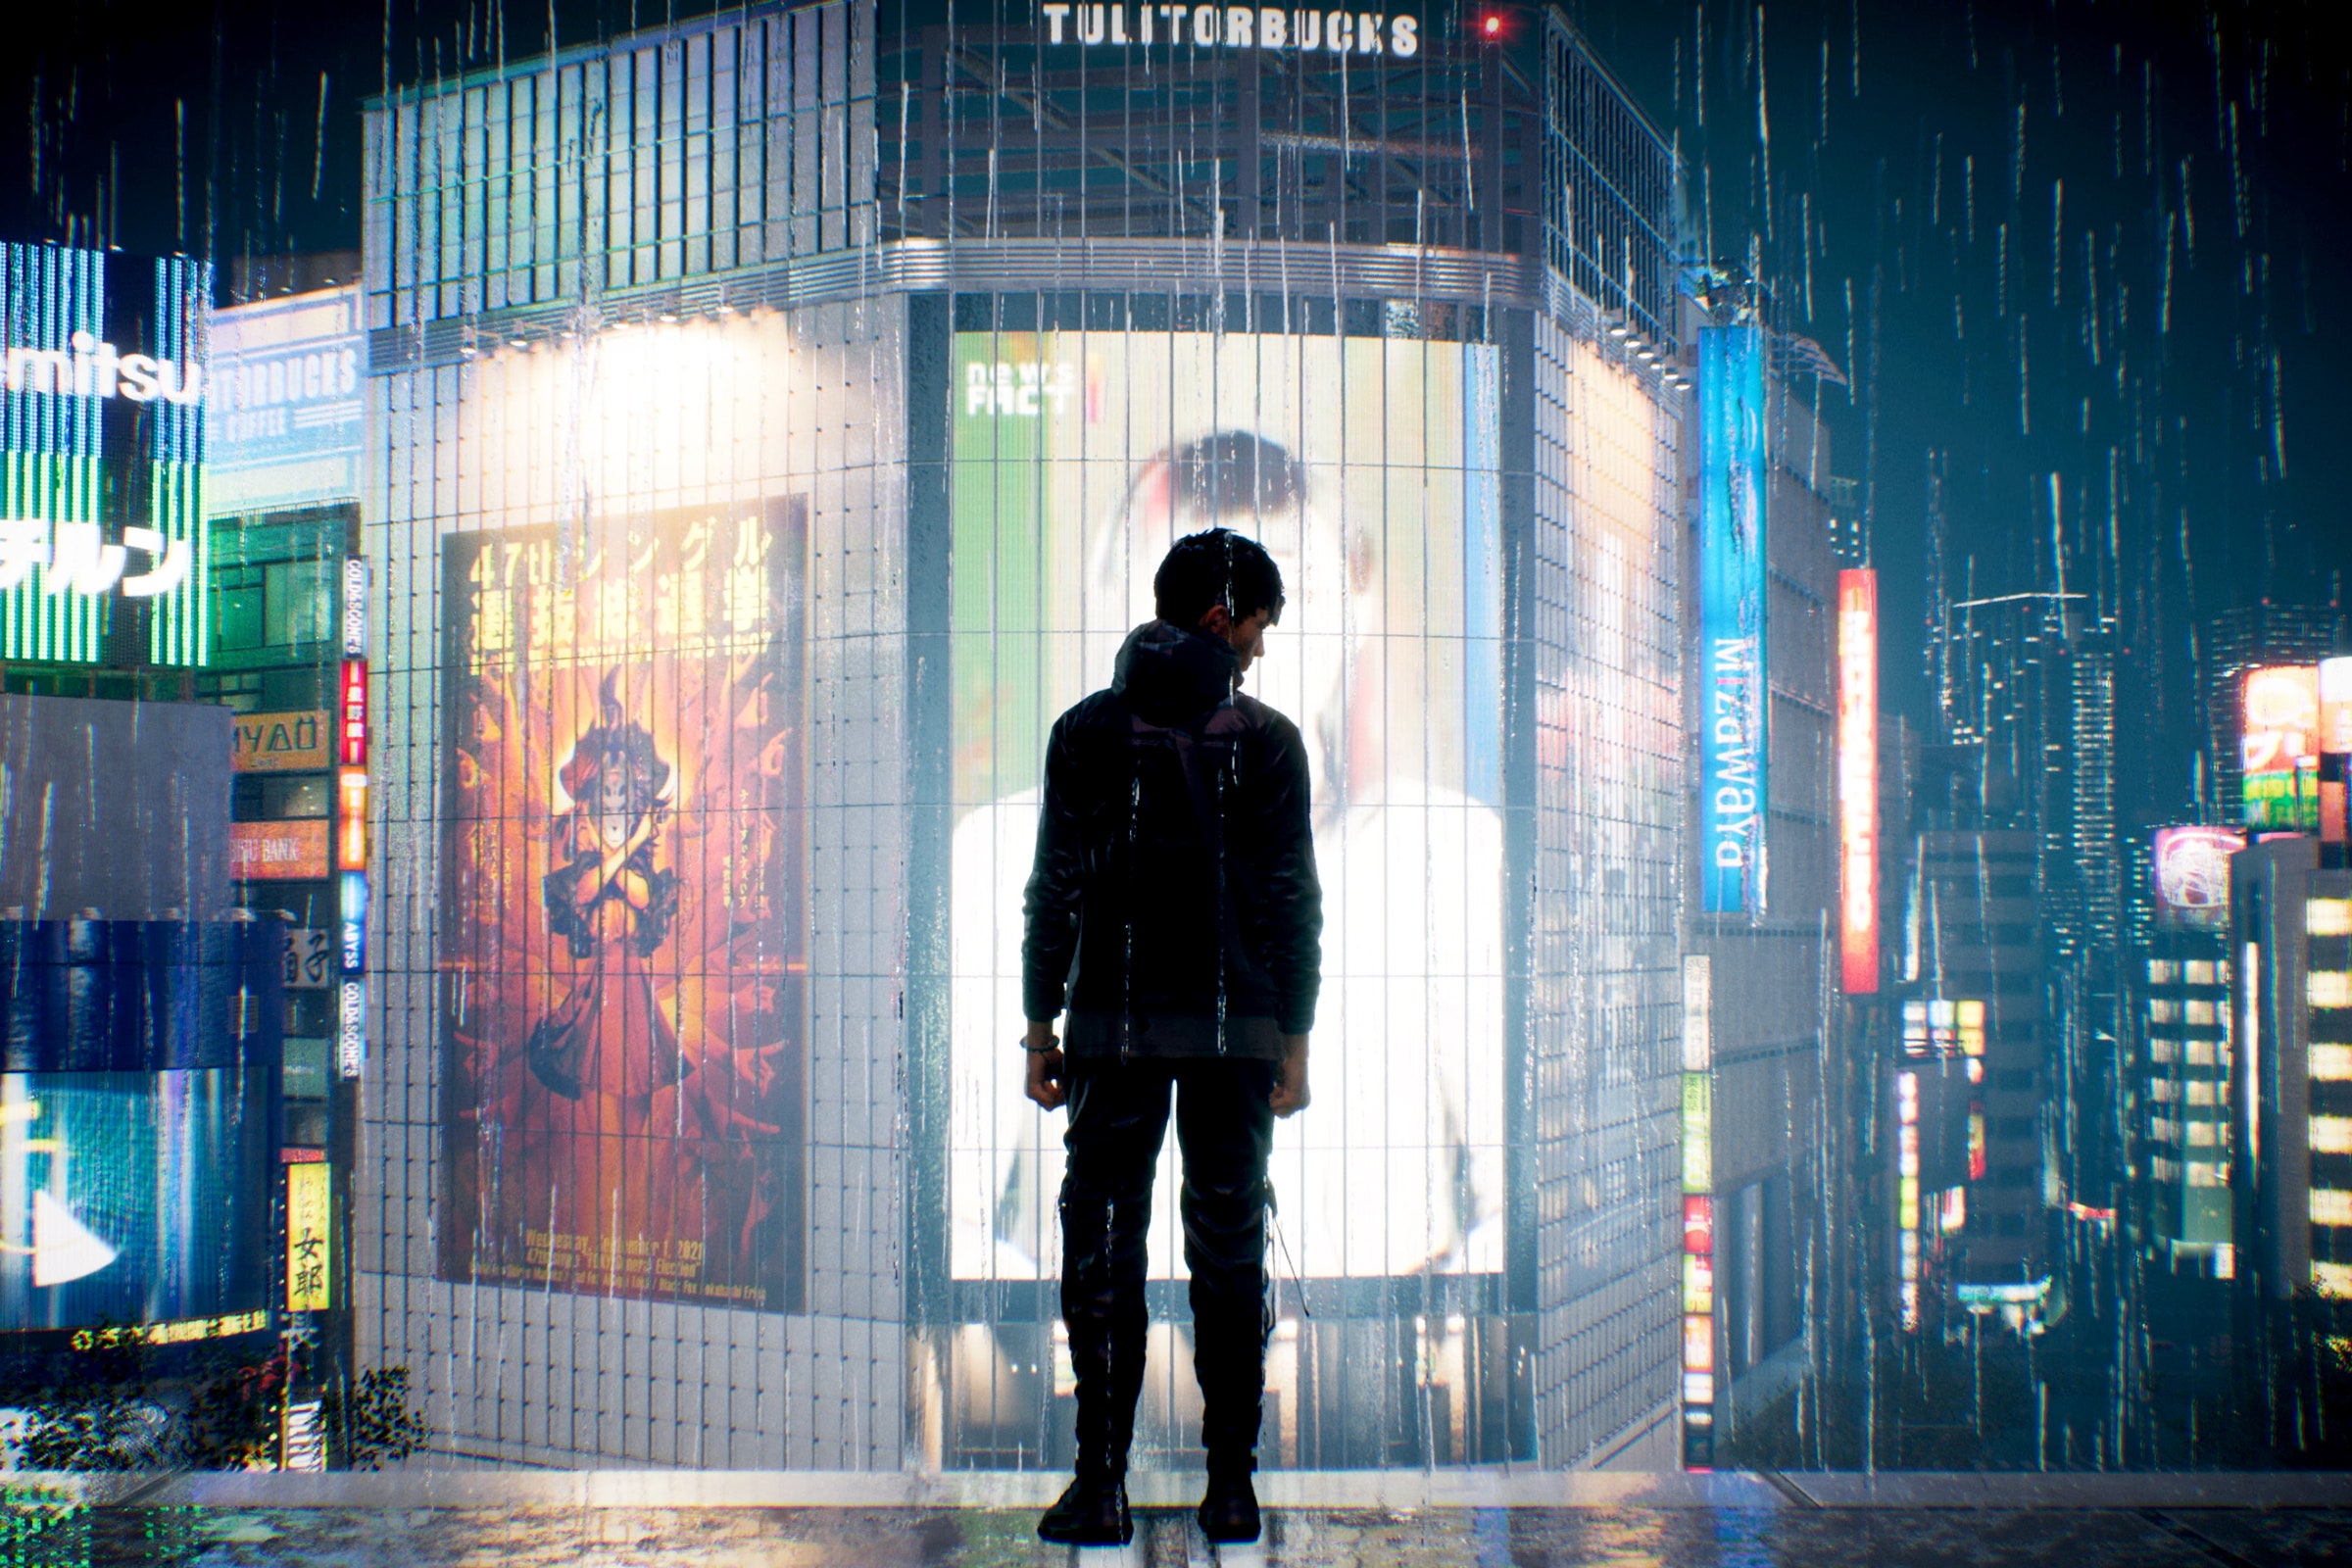 Ghostwire: Tokyo  Download and Buy Today - Epic Games Store